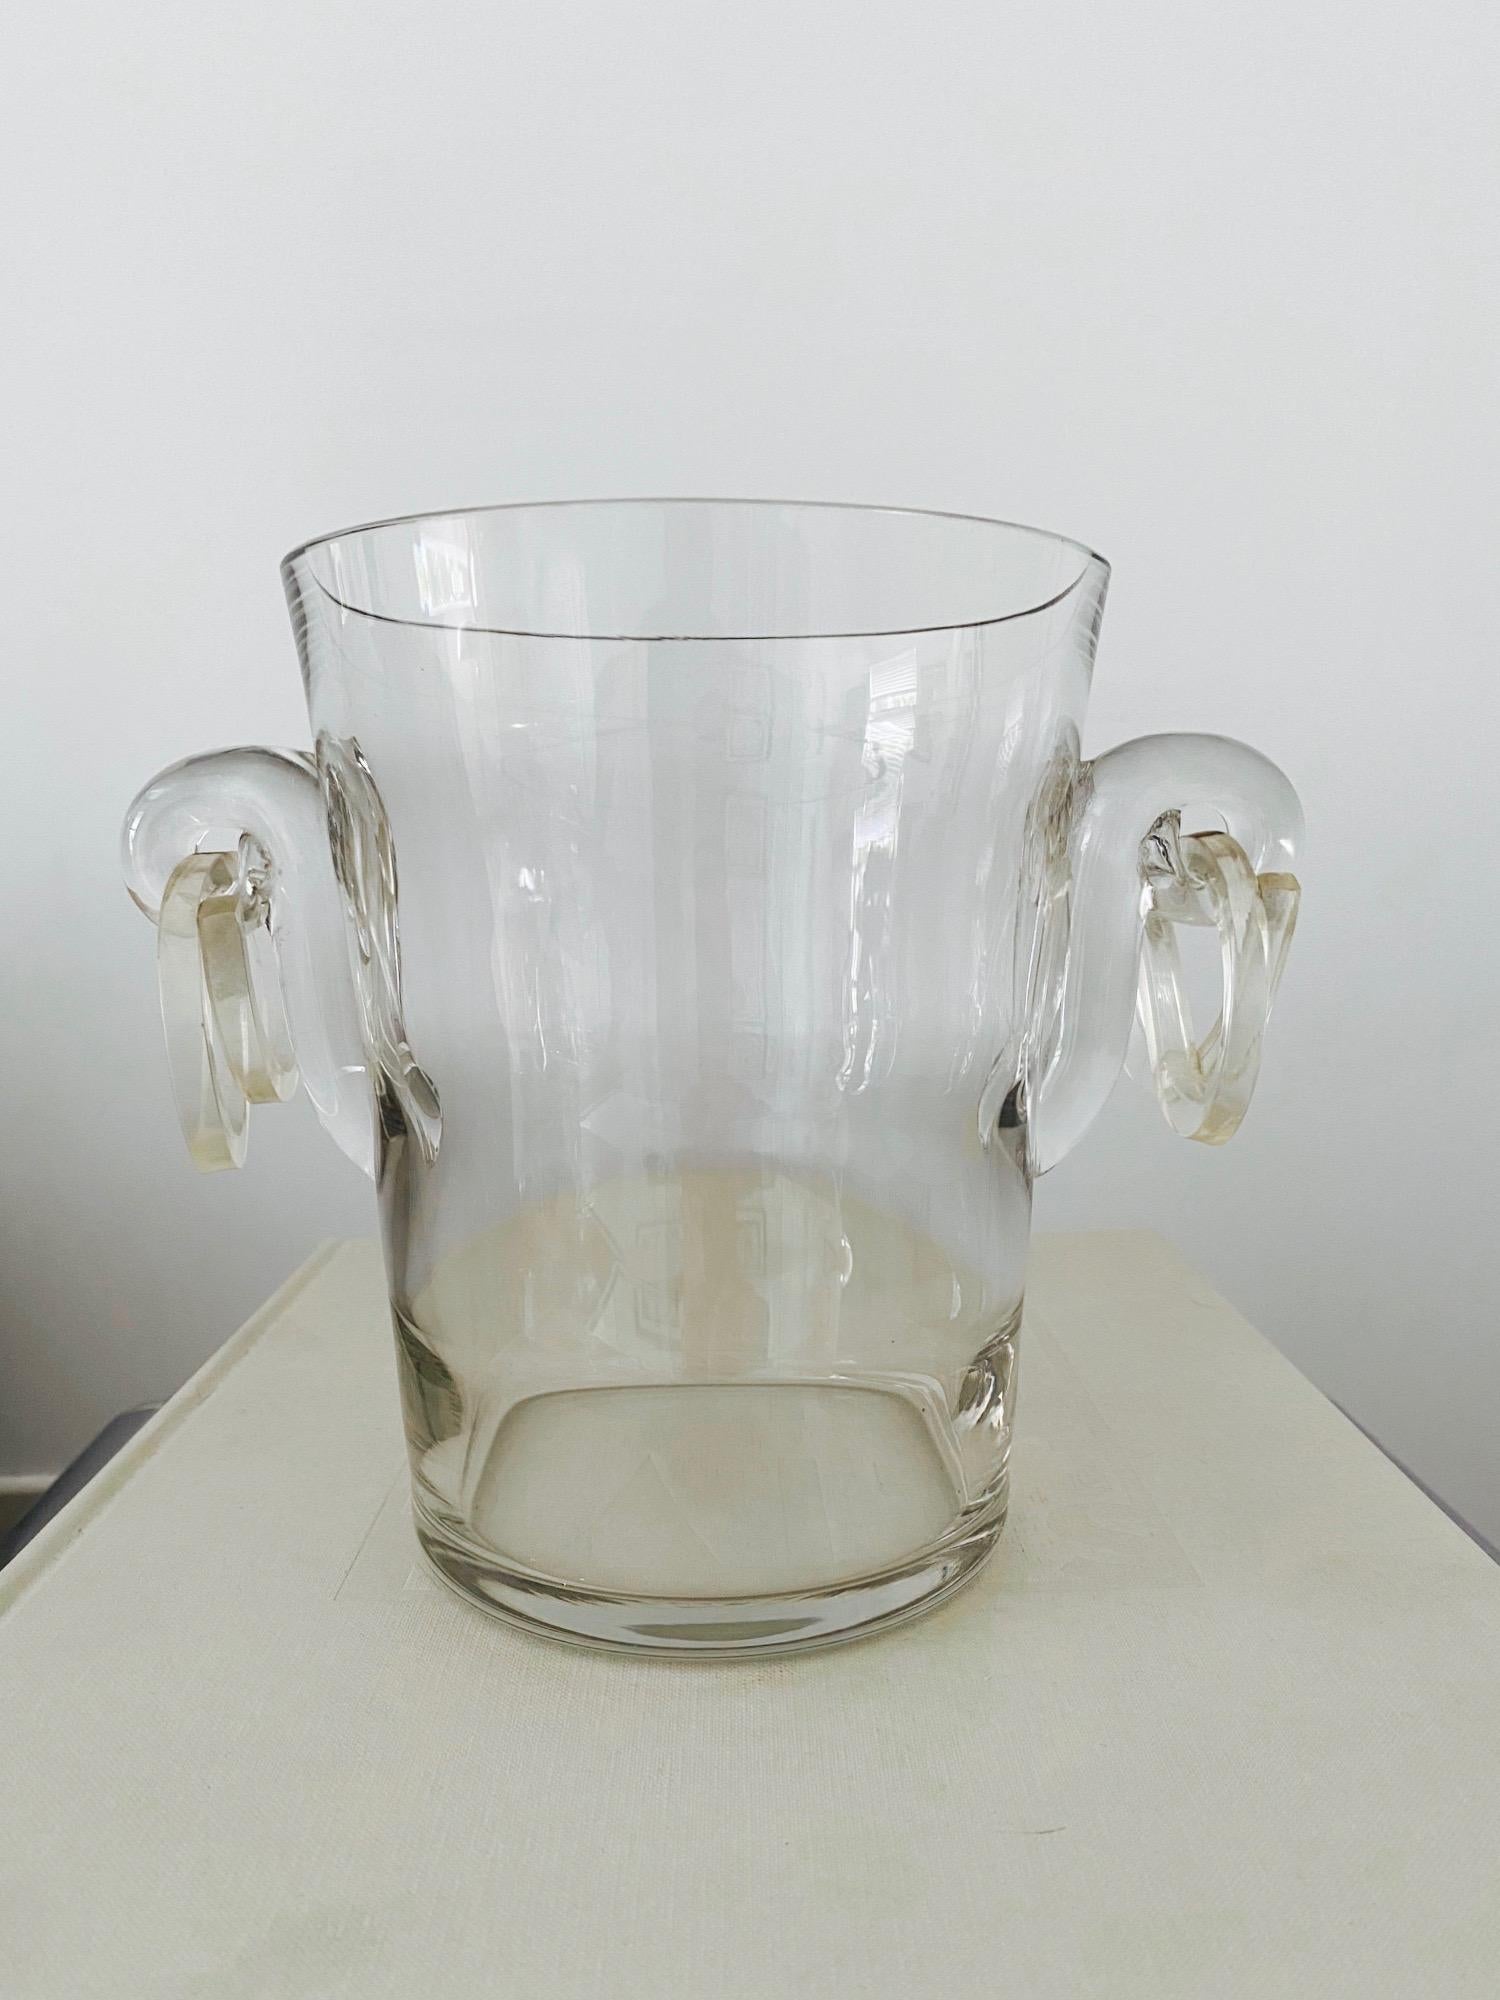 Mid-Century Modern Vintage Italian Crystal Champagne Cooler with Lucite Handles, c. 1970's